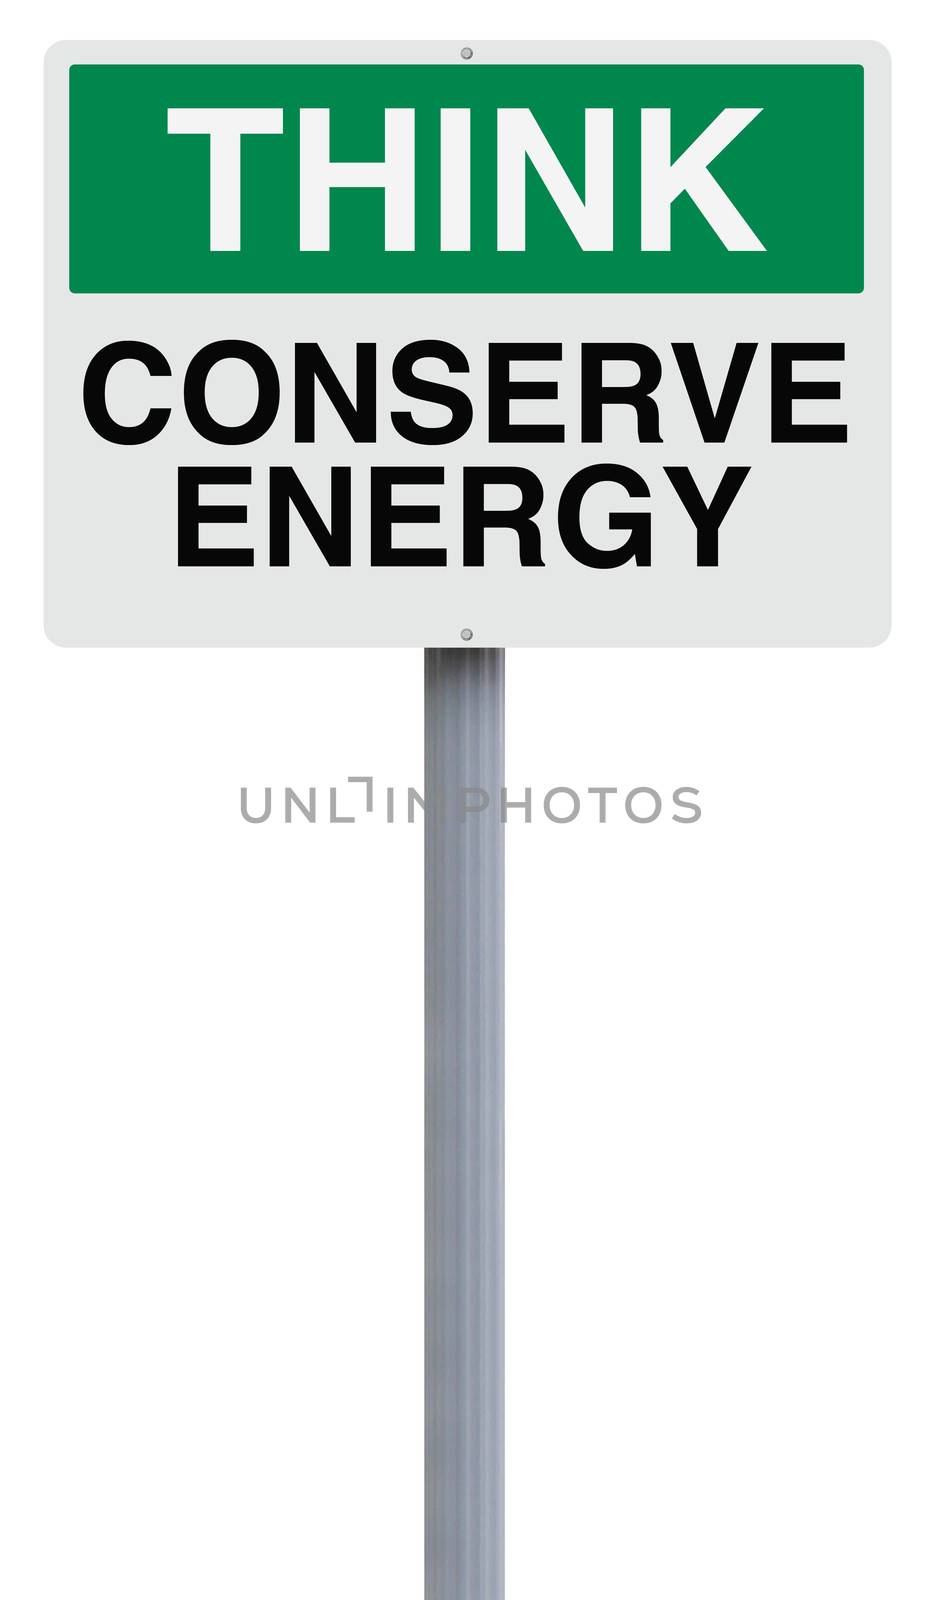 Conserve Energy by rnl